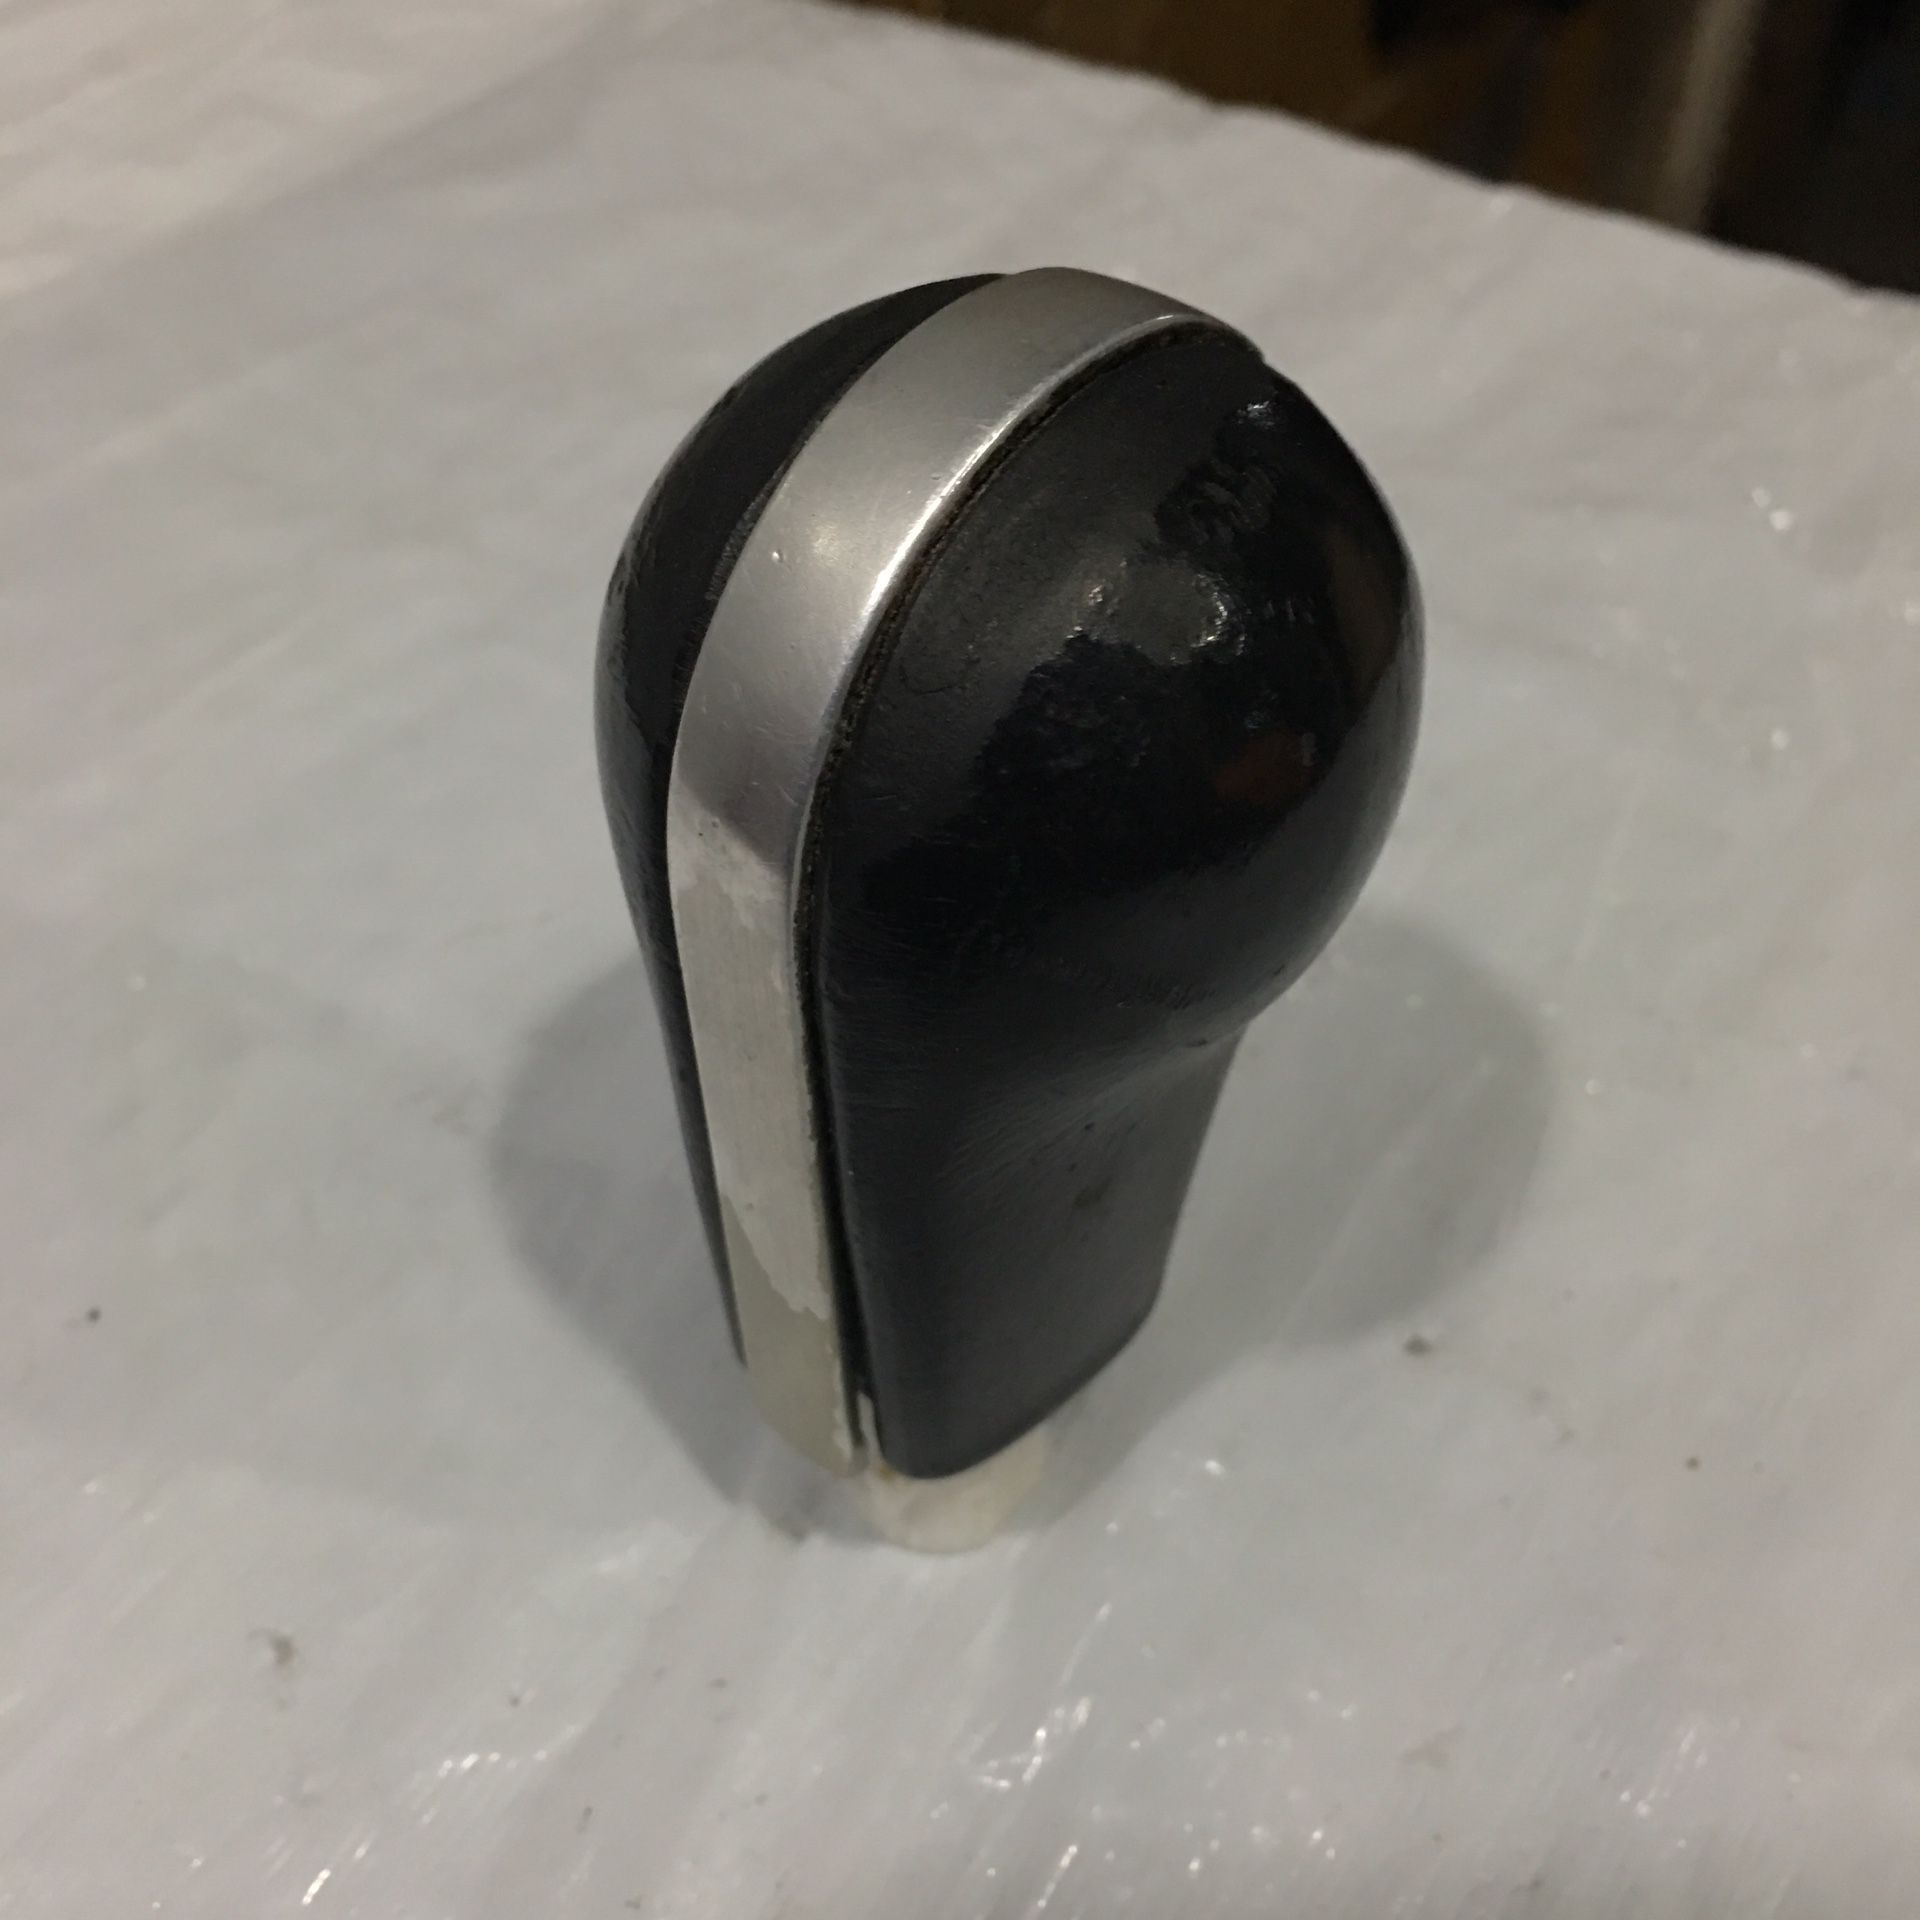 Infiniti G35 Shifter Shift Knob Trim Shifter Handle (for AT / Automatic Transmission)